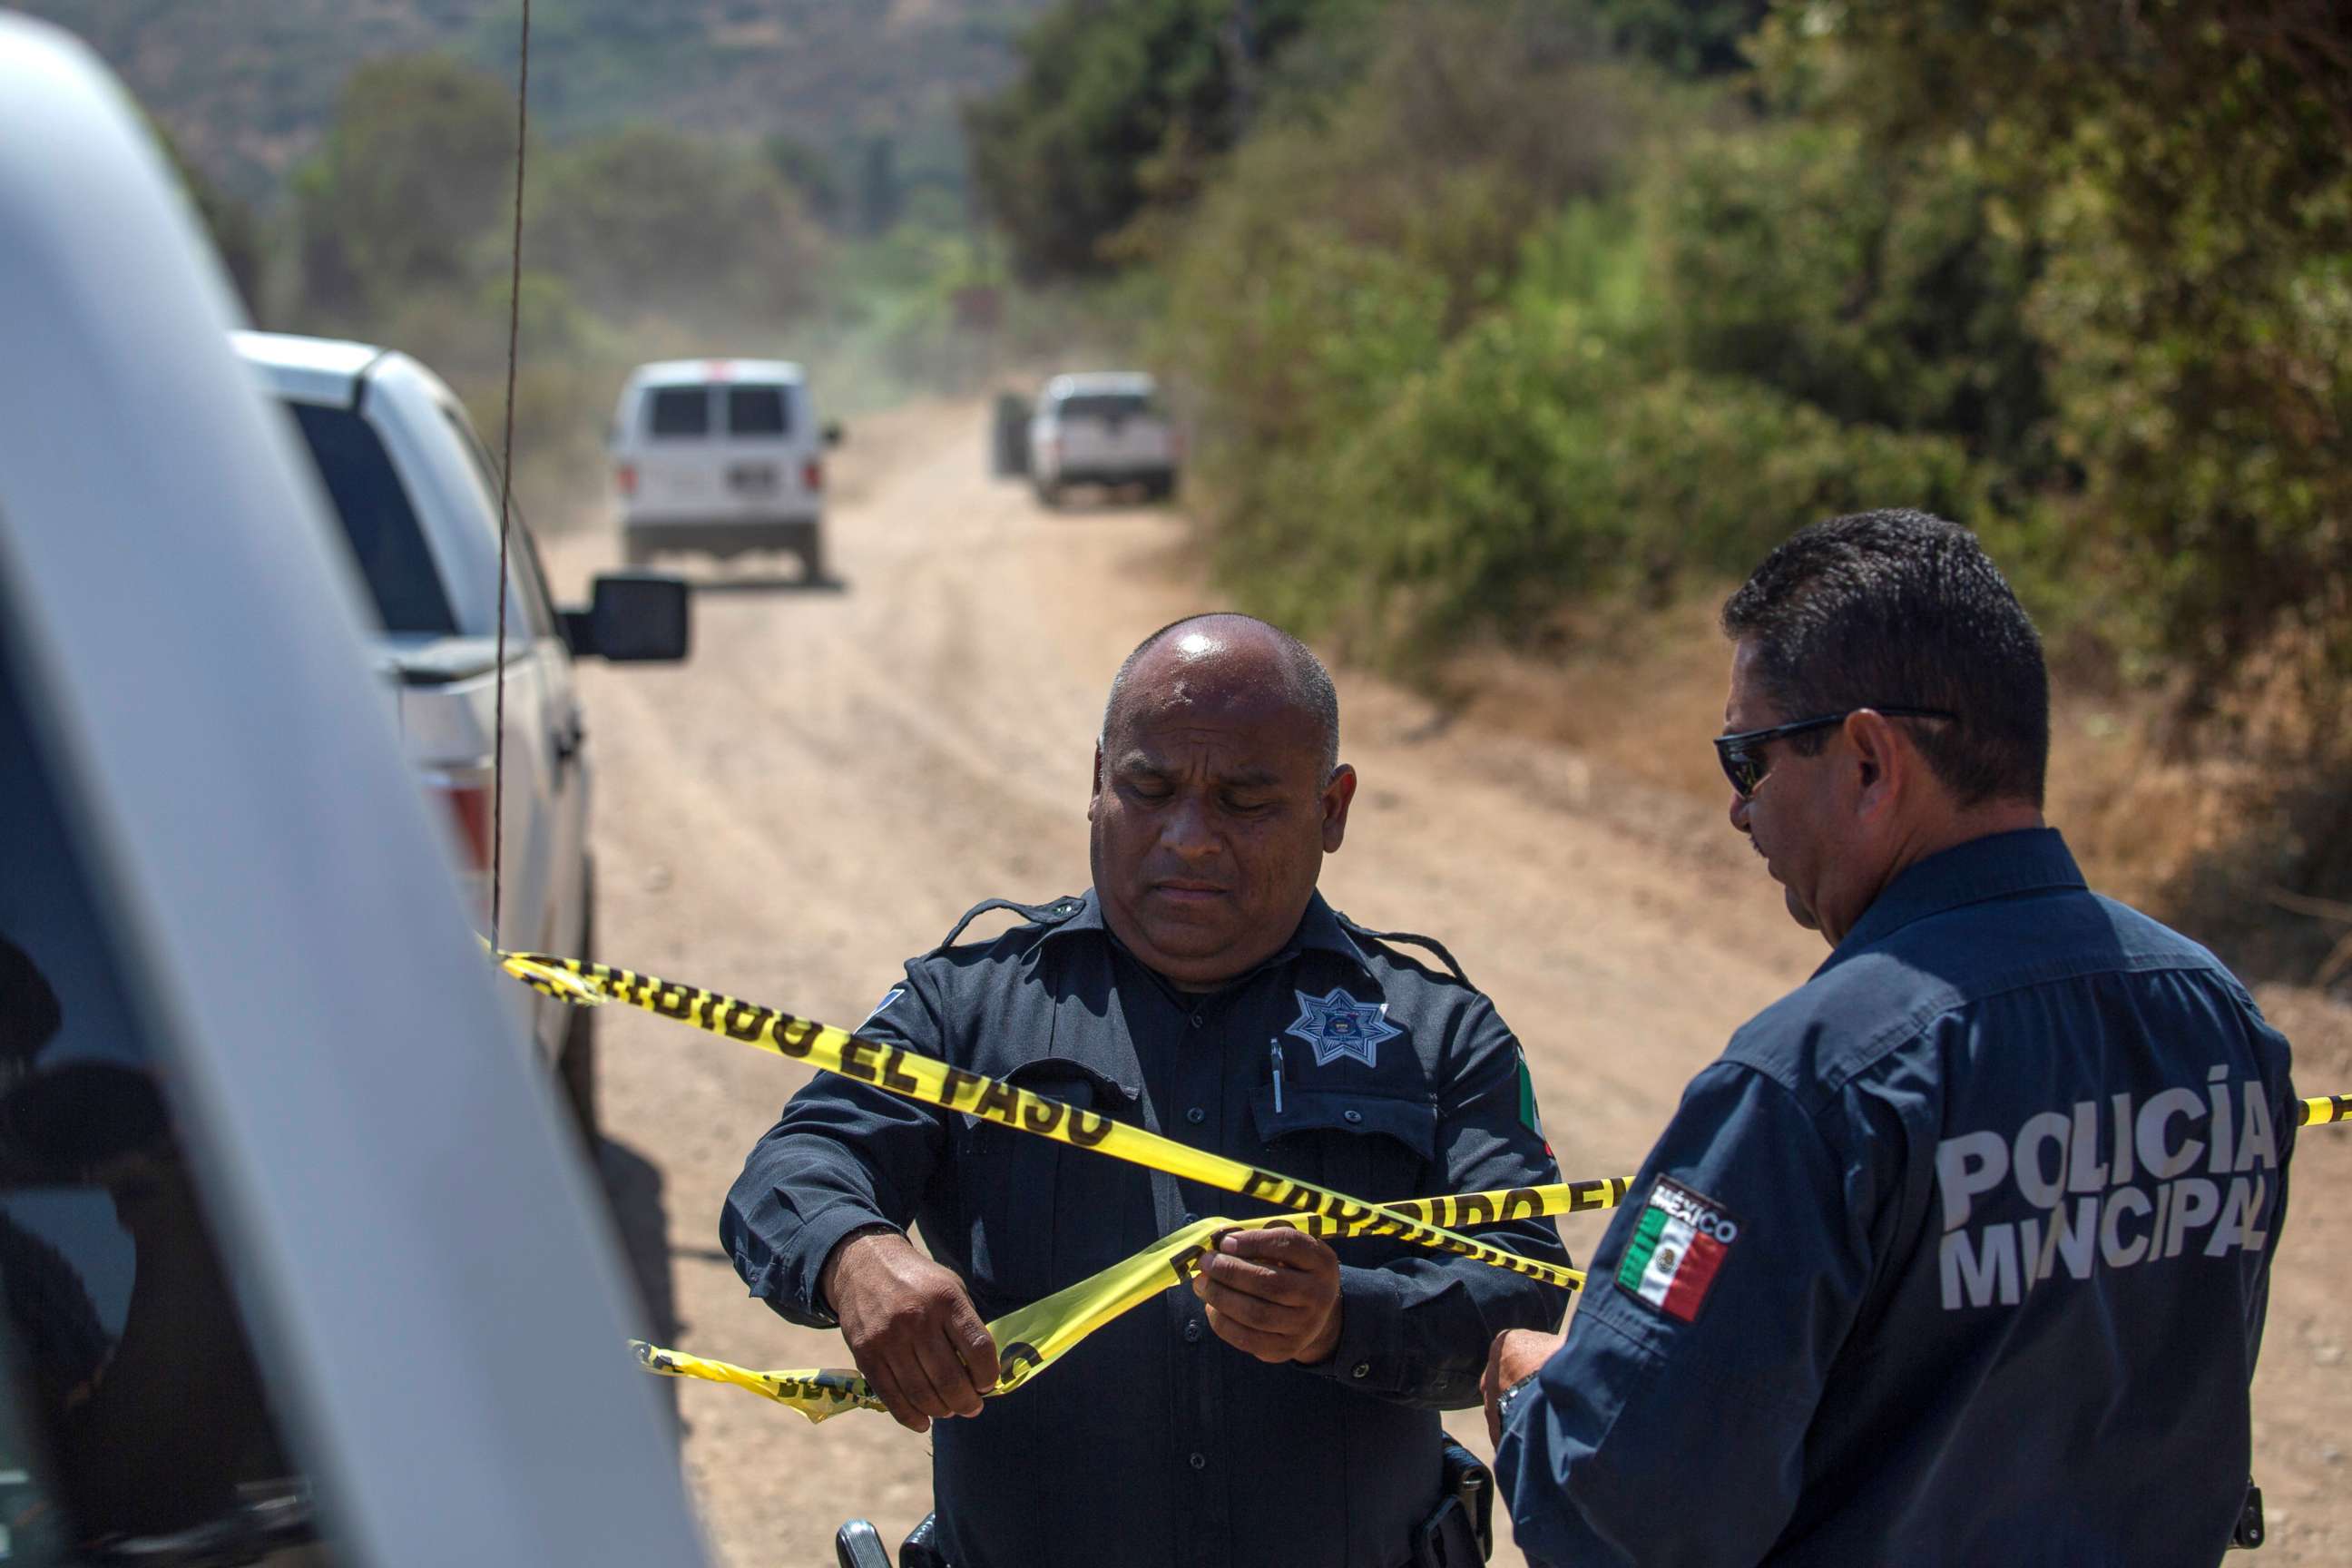 PHOTO: Police officers hold a police cordon at the scene where two young American children were found dead, in Rosarito, Baja California state, Mexico August 9, 2021. Picture taken August 9, 2021.